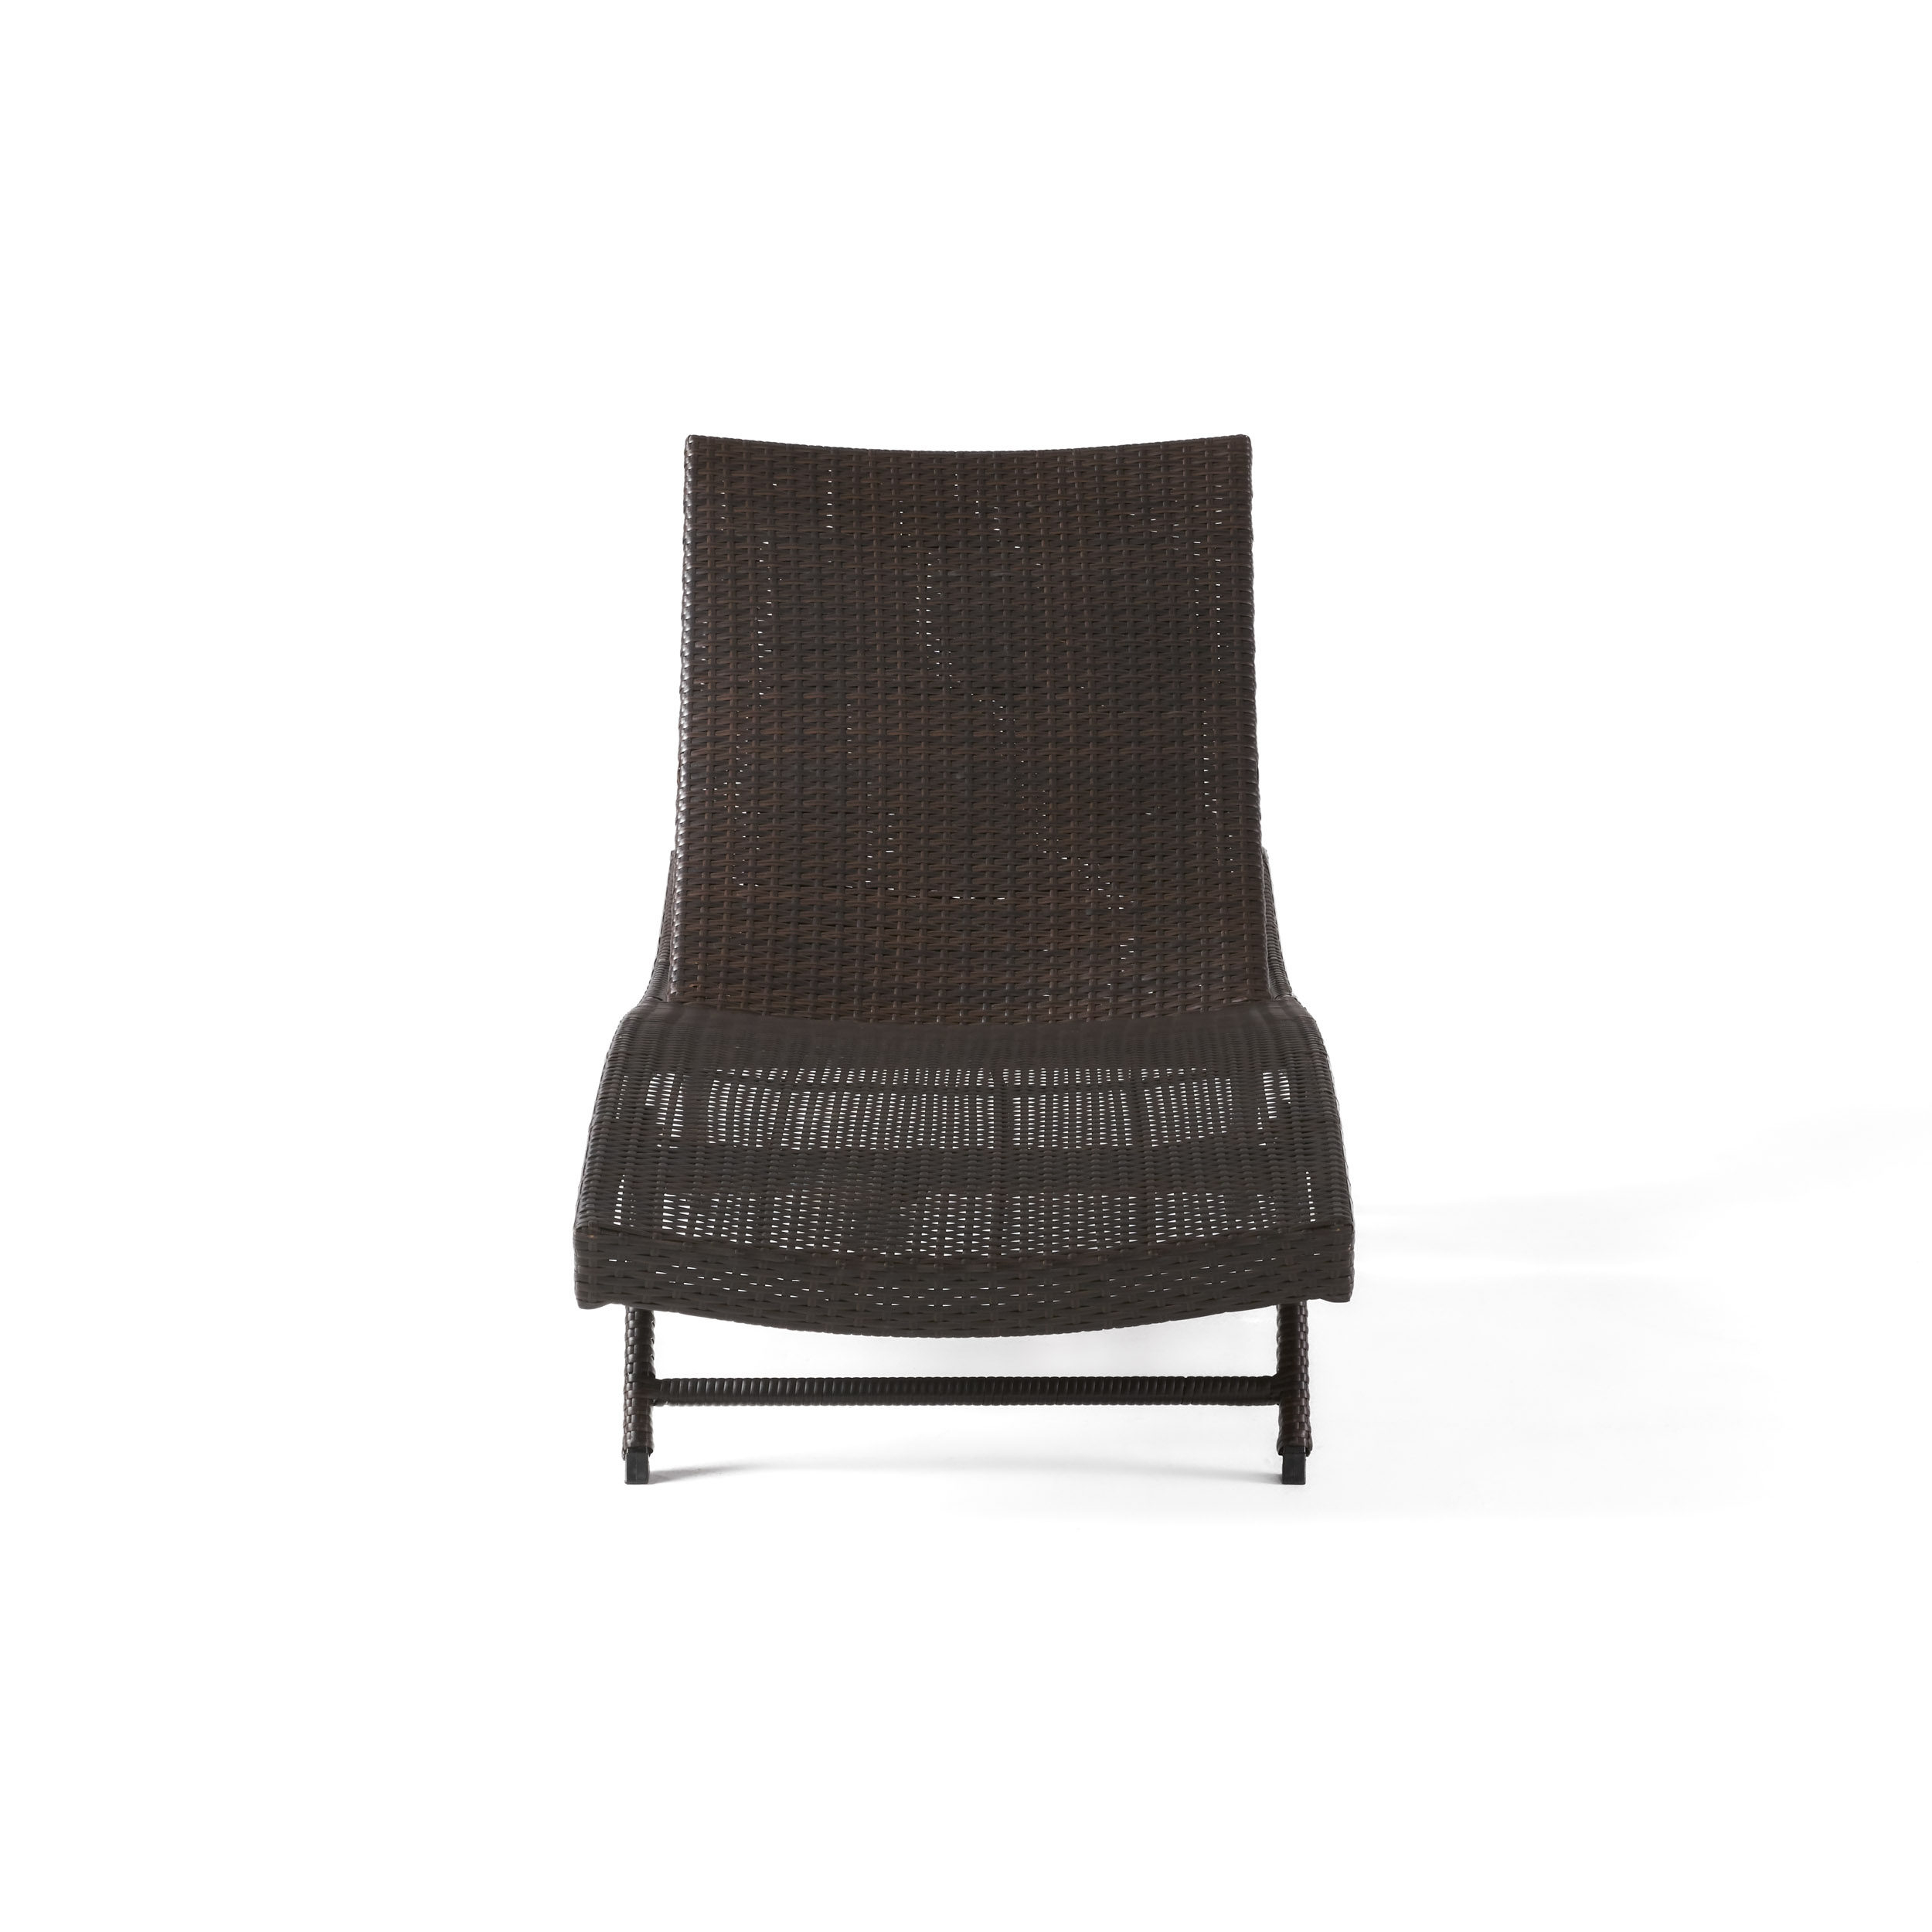 Eliana Brown Wicker Chaise Outdoor Lounge Chairs For Lawn, Patio